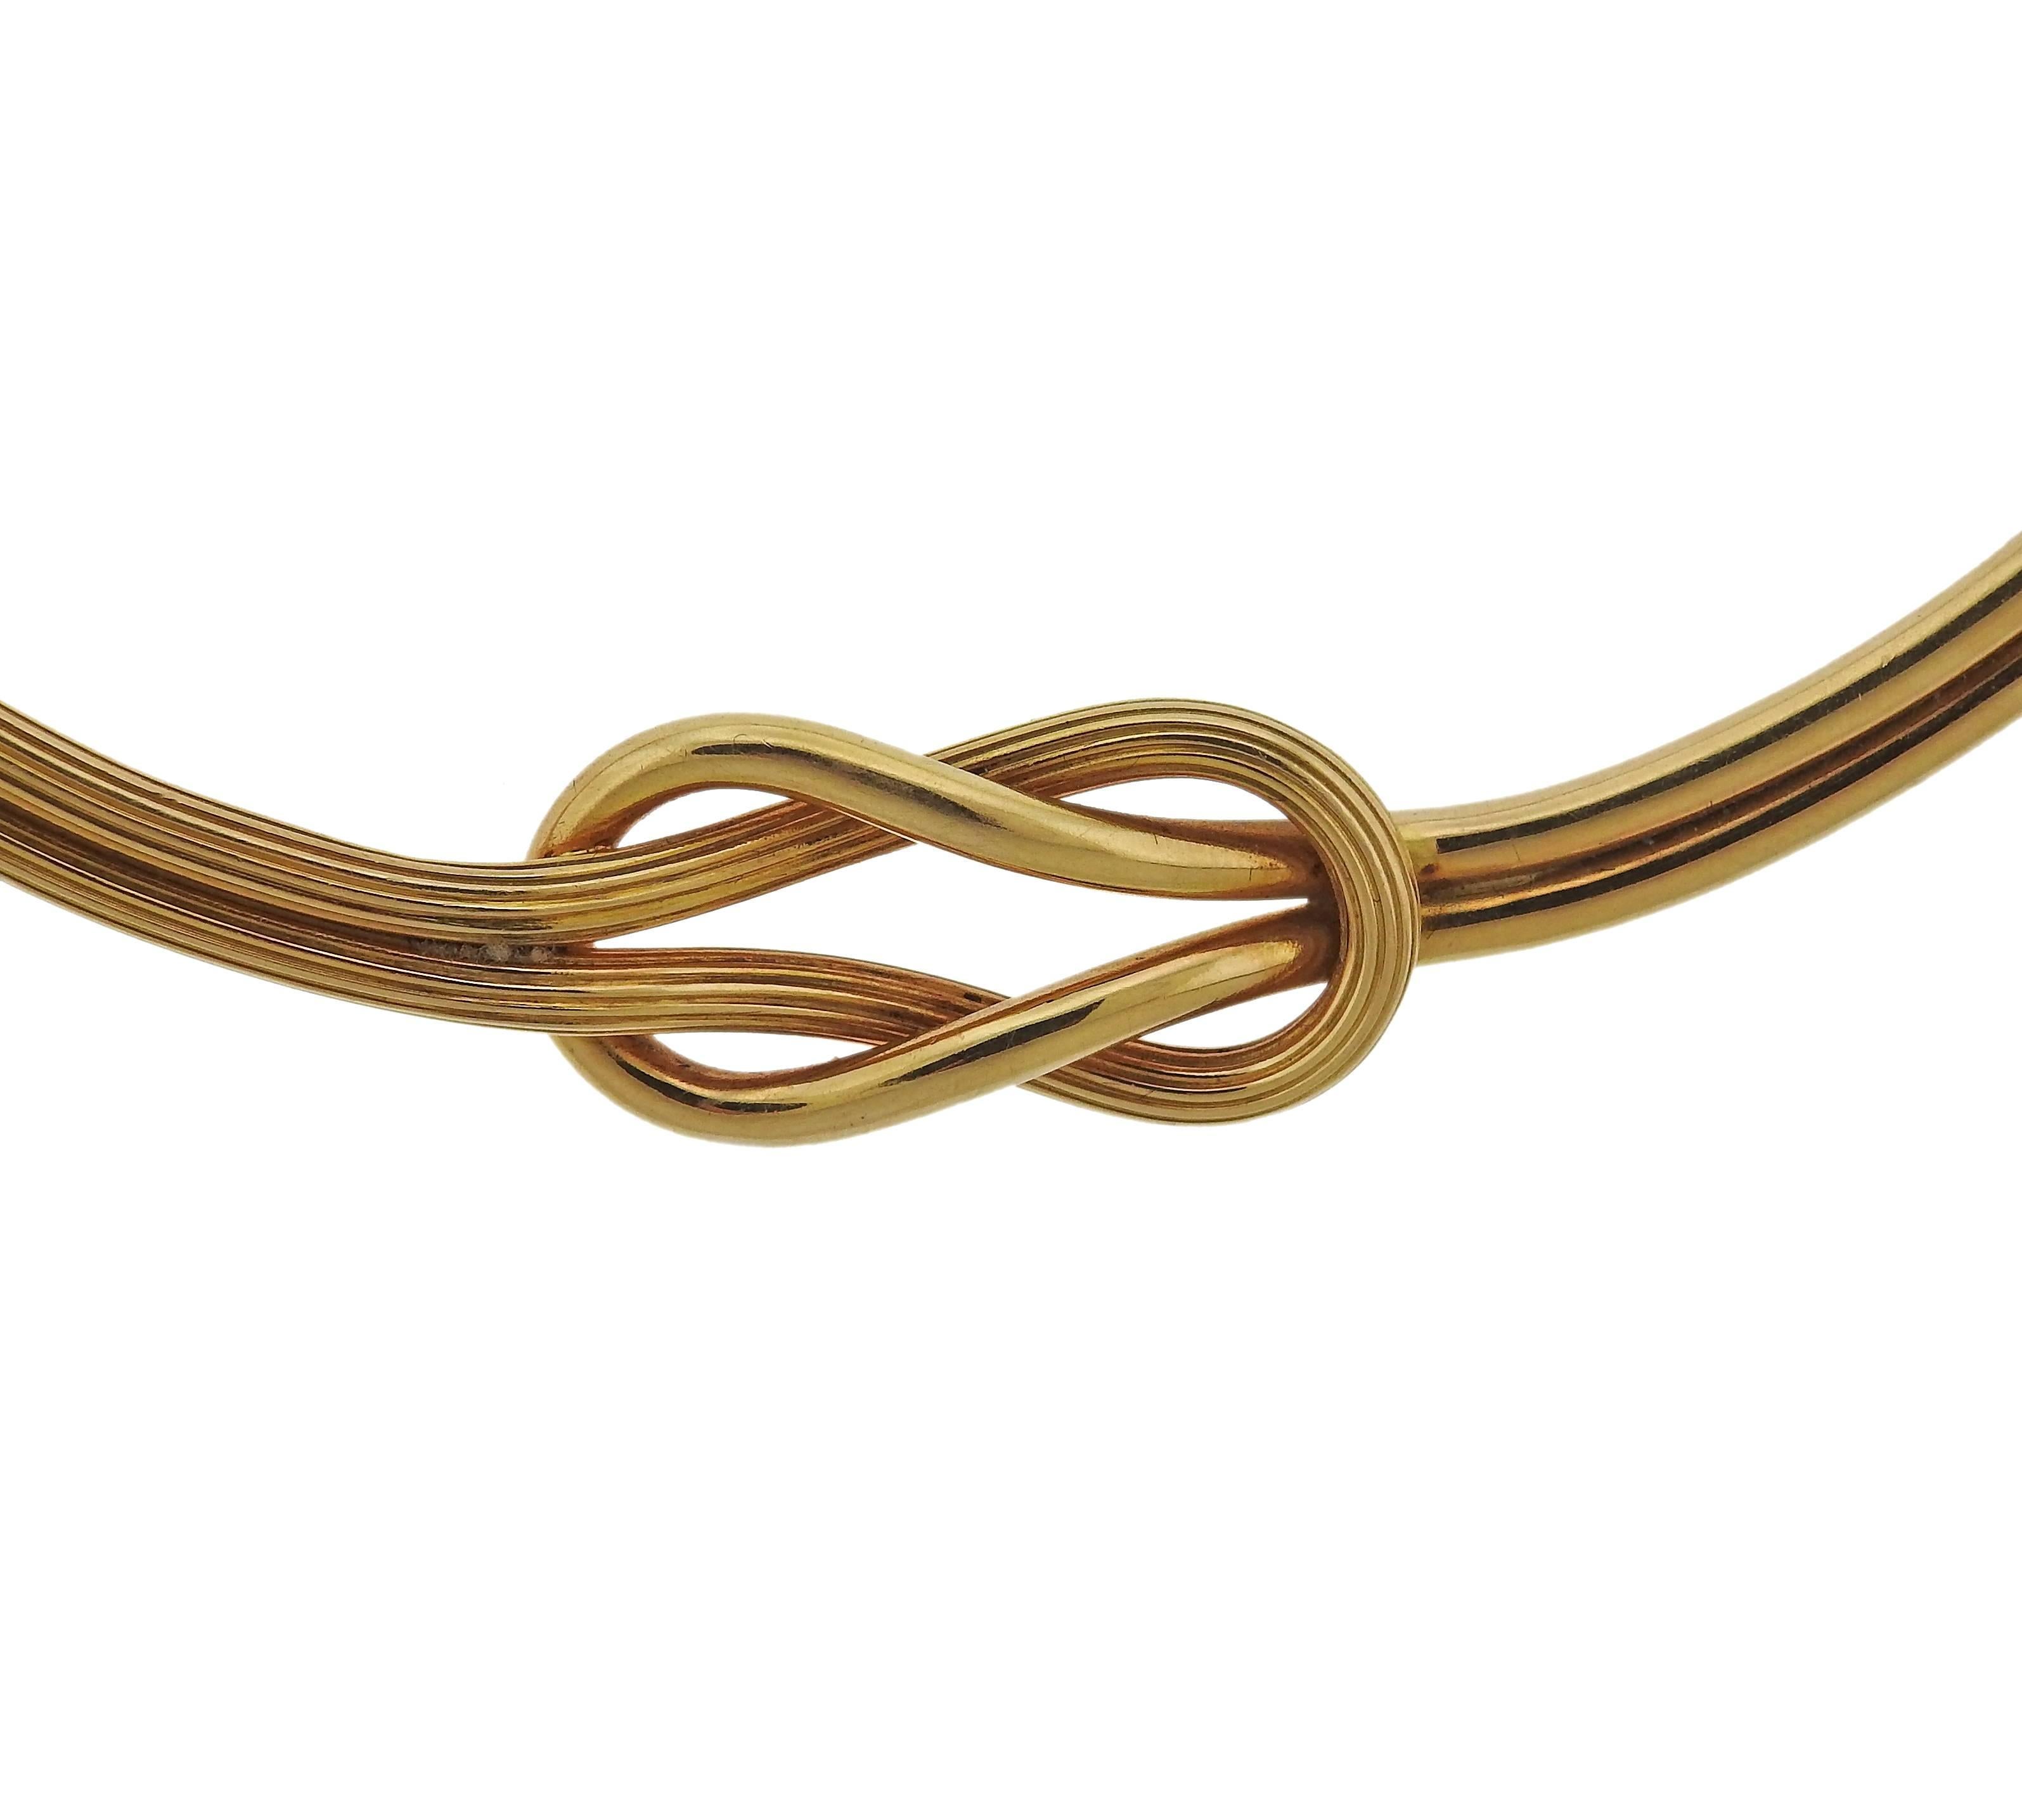 An 18k yellow gold necklace, crafted by Ilias Lalaounis, featuring tied knot design. Necklace's inner circumference is 16" , knot measures 33mm x 16mm.  Weight - 32.2 grams. Marked: 12, 750, Maker's mark, Greece 